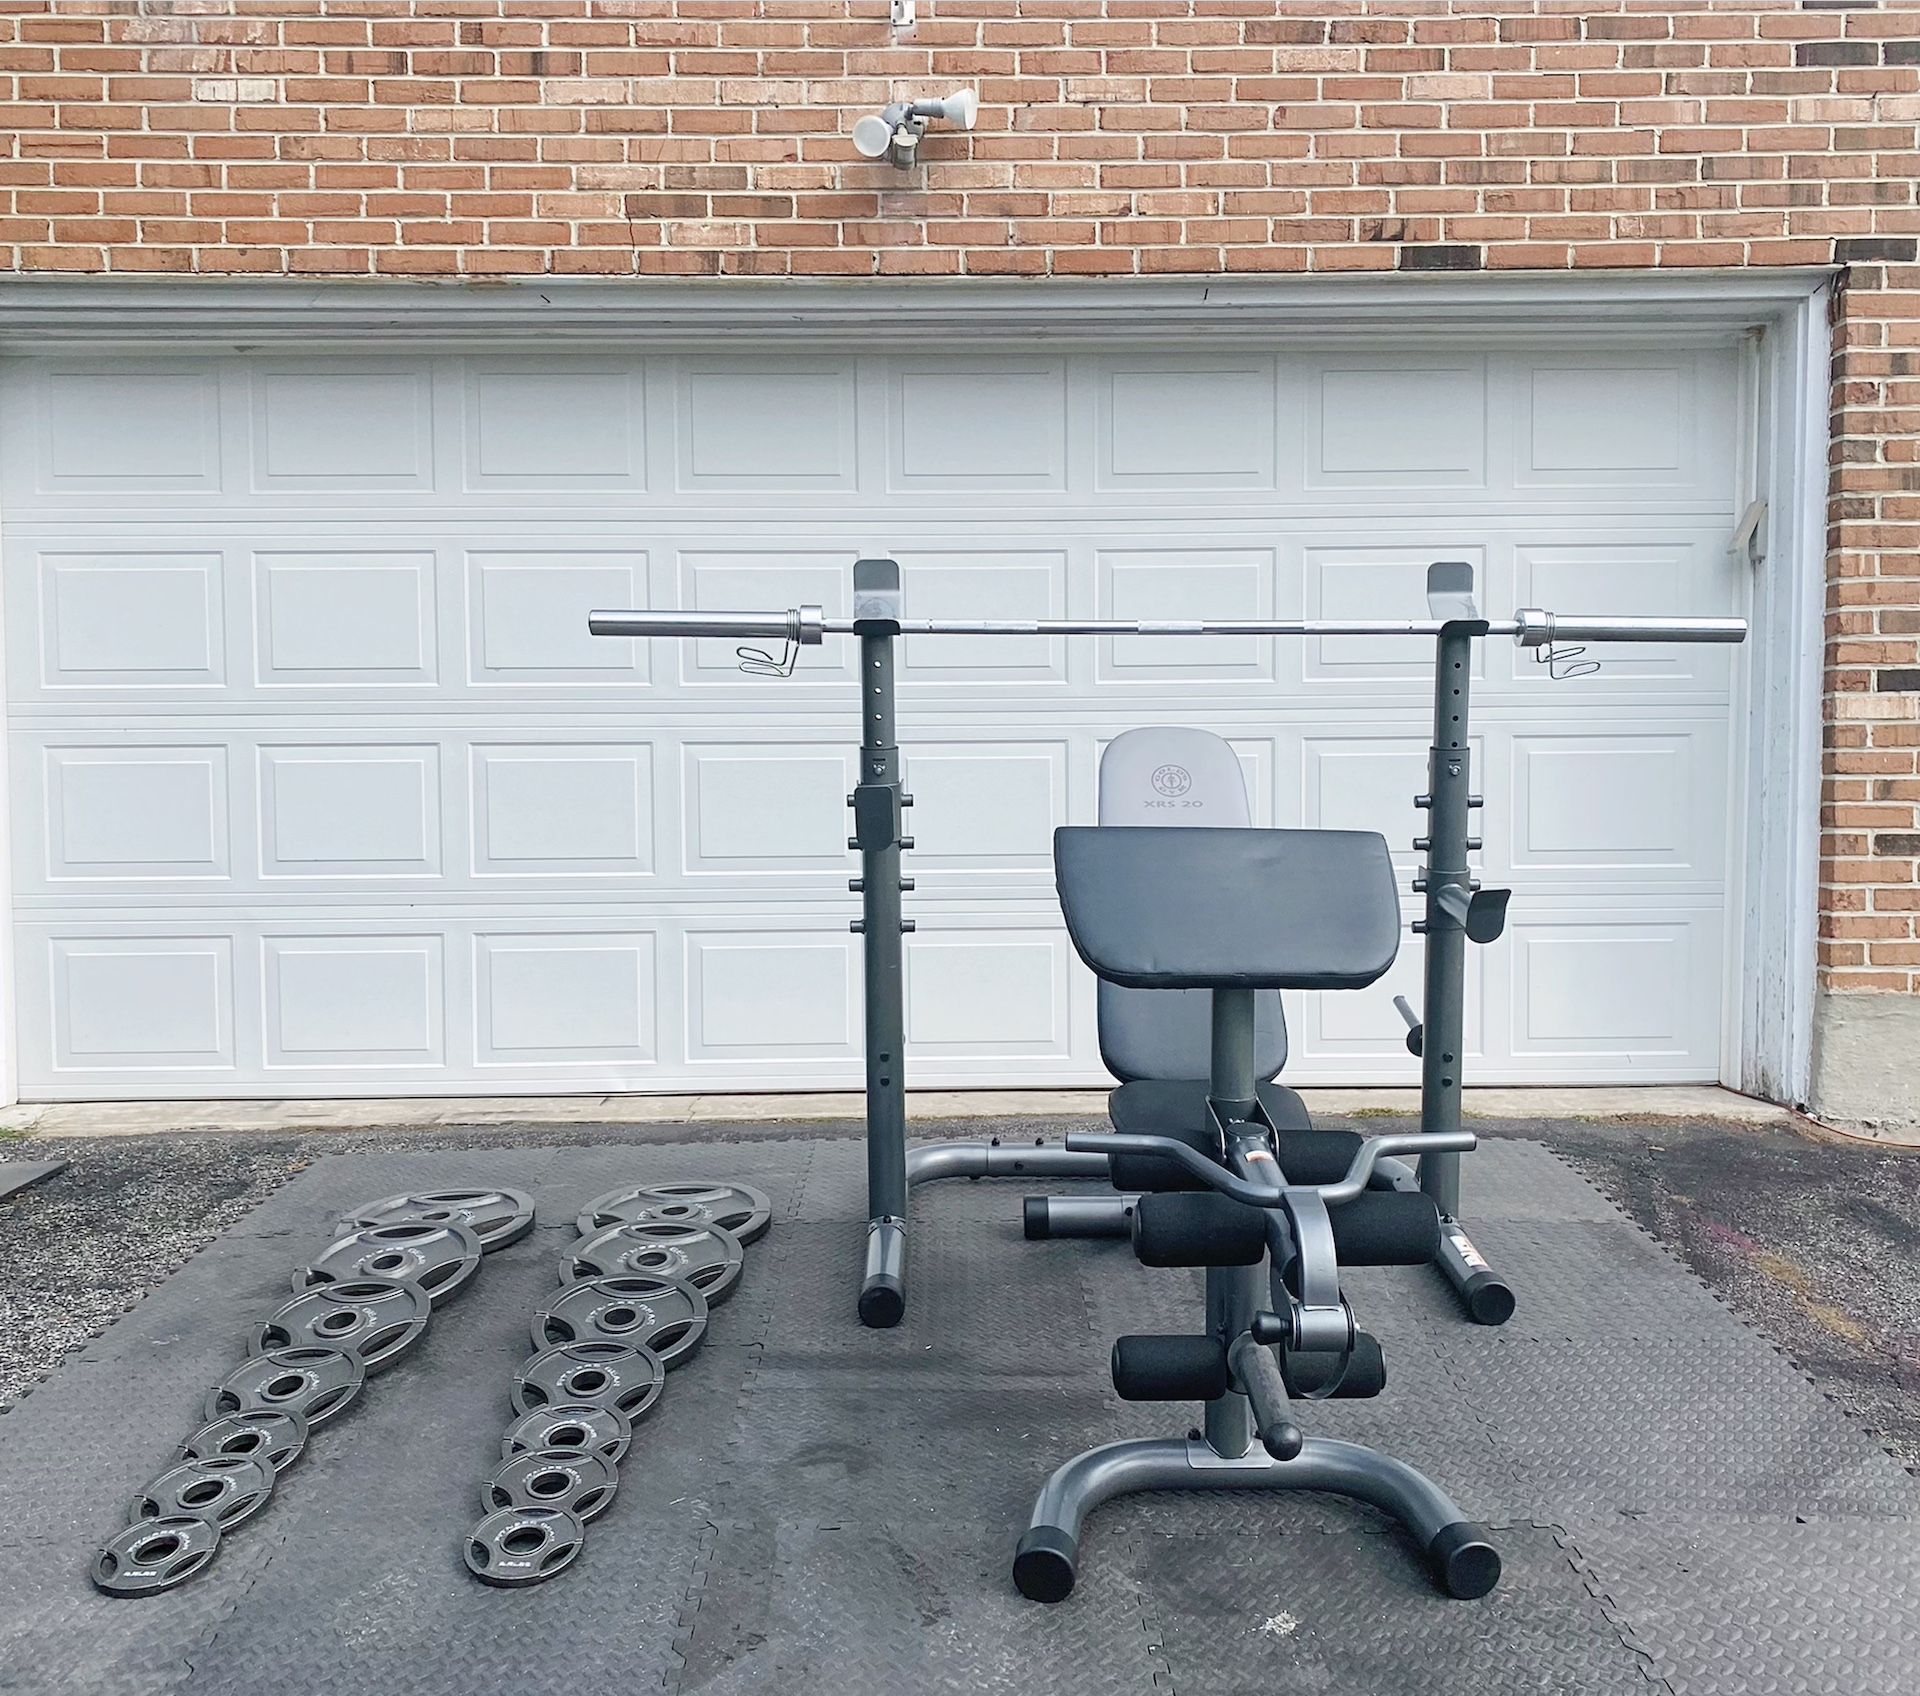 LIKE NEW HOME GYM SET WITH 255LBS OF WEIGHTS - EVERYTHING IN THE PHOTOS